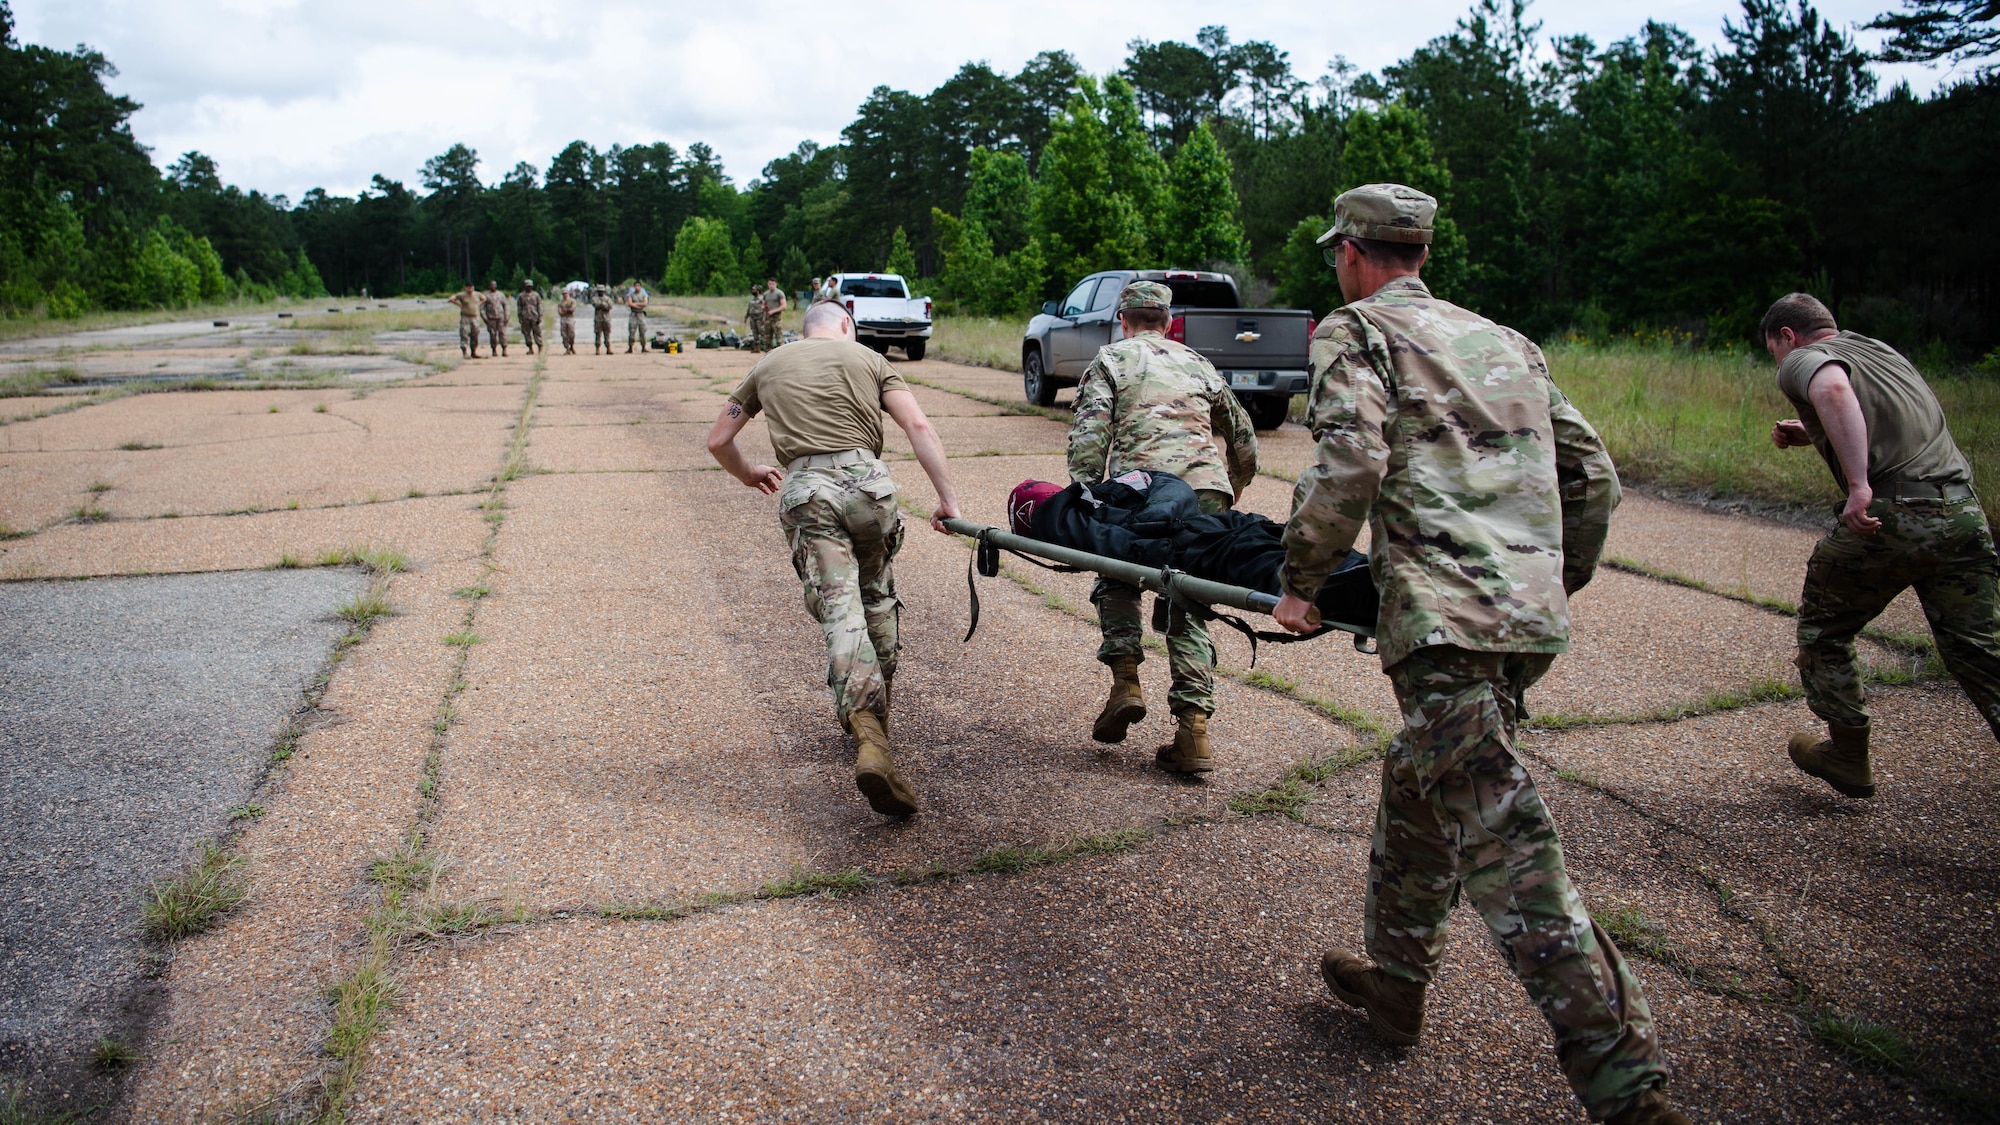 Airmen from the 2nd Civil Engineer Squadron transport a simulated casualty during a 2nd CES training exercise at Barksdale Air Force Base, Louisiana, May 20, 2021. The exercise showcased contingency skills such as: land navigation, self-aid buddy care and chemical, biological, radiological and nuclear preparedness. (U.S. Air Force photo by Senior Airman Jacob B. Wrightsman)